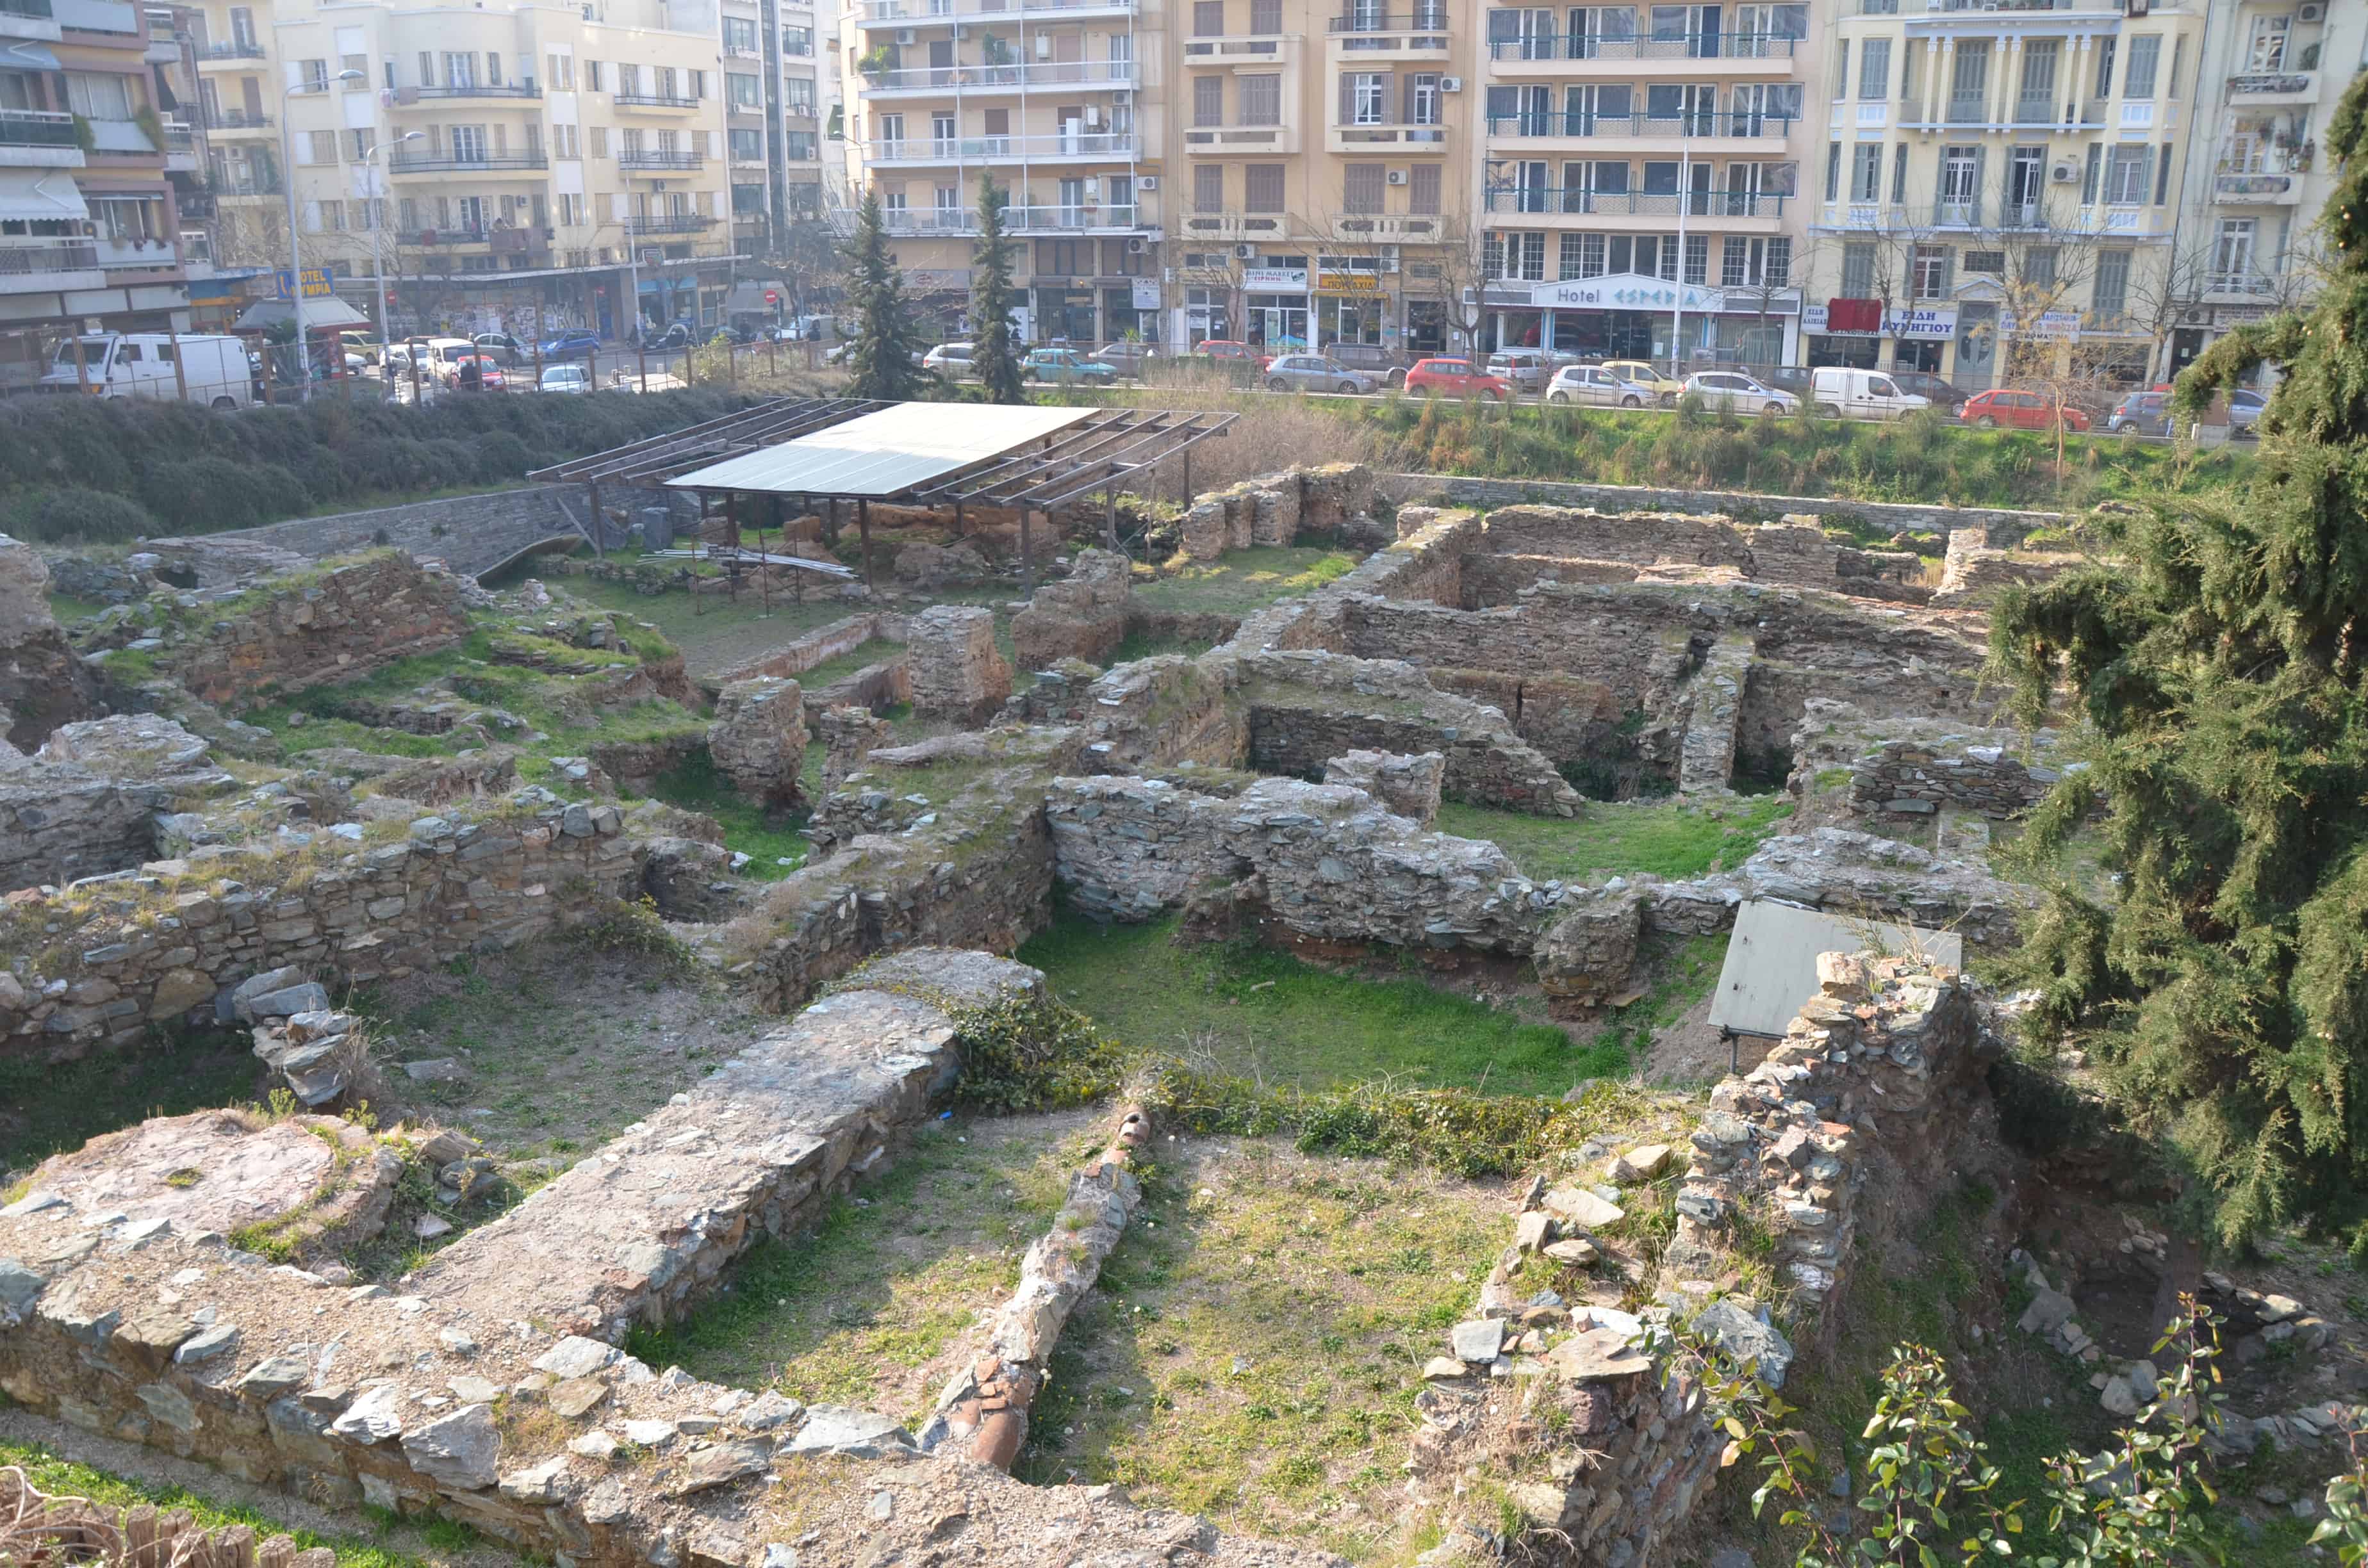 Ancient ruins in Thessaloniki, Greece